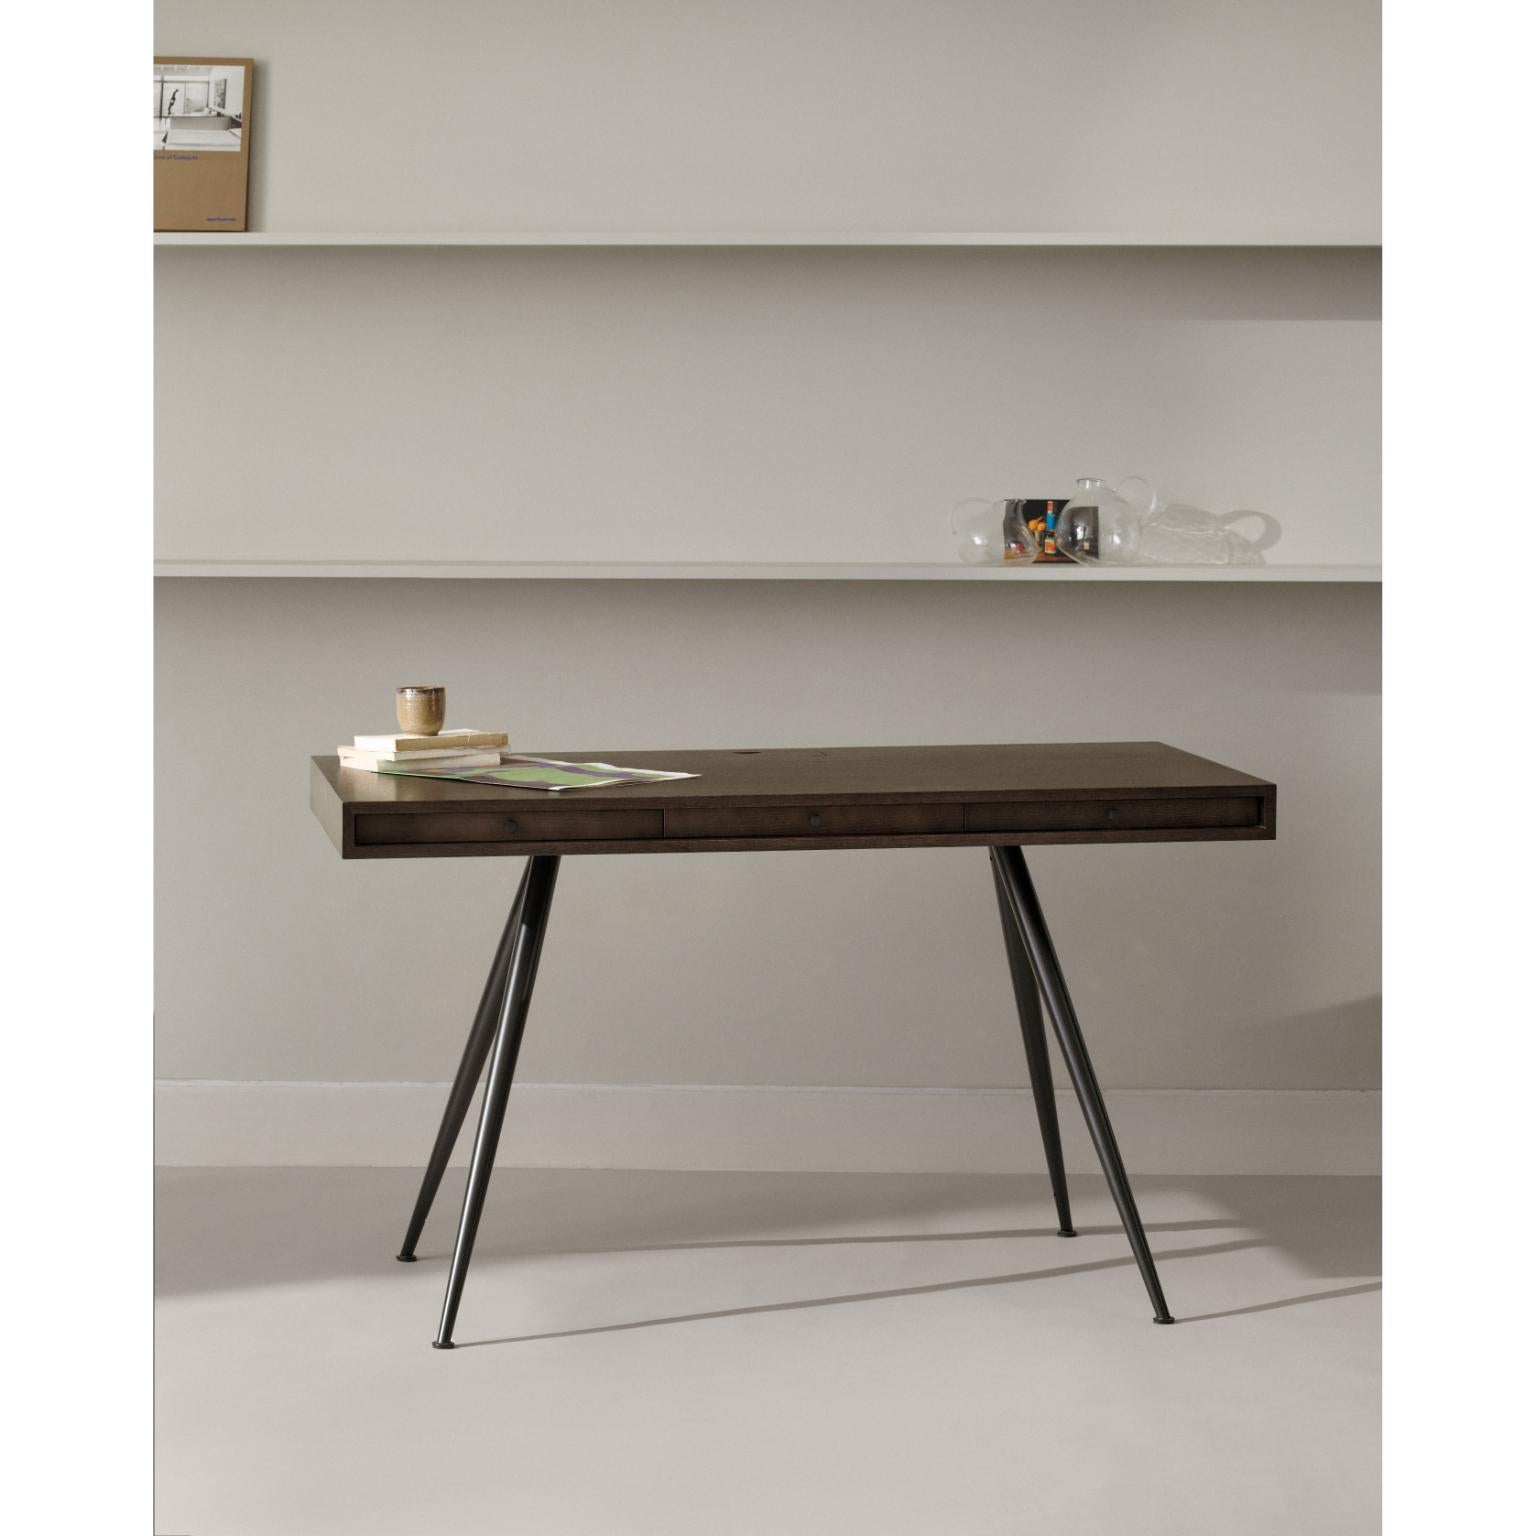 Contemporary JFK Home Desk With Standard Legs by NORR11